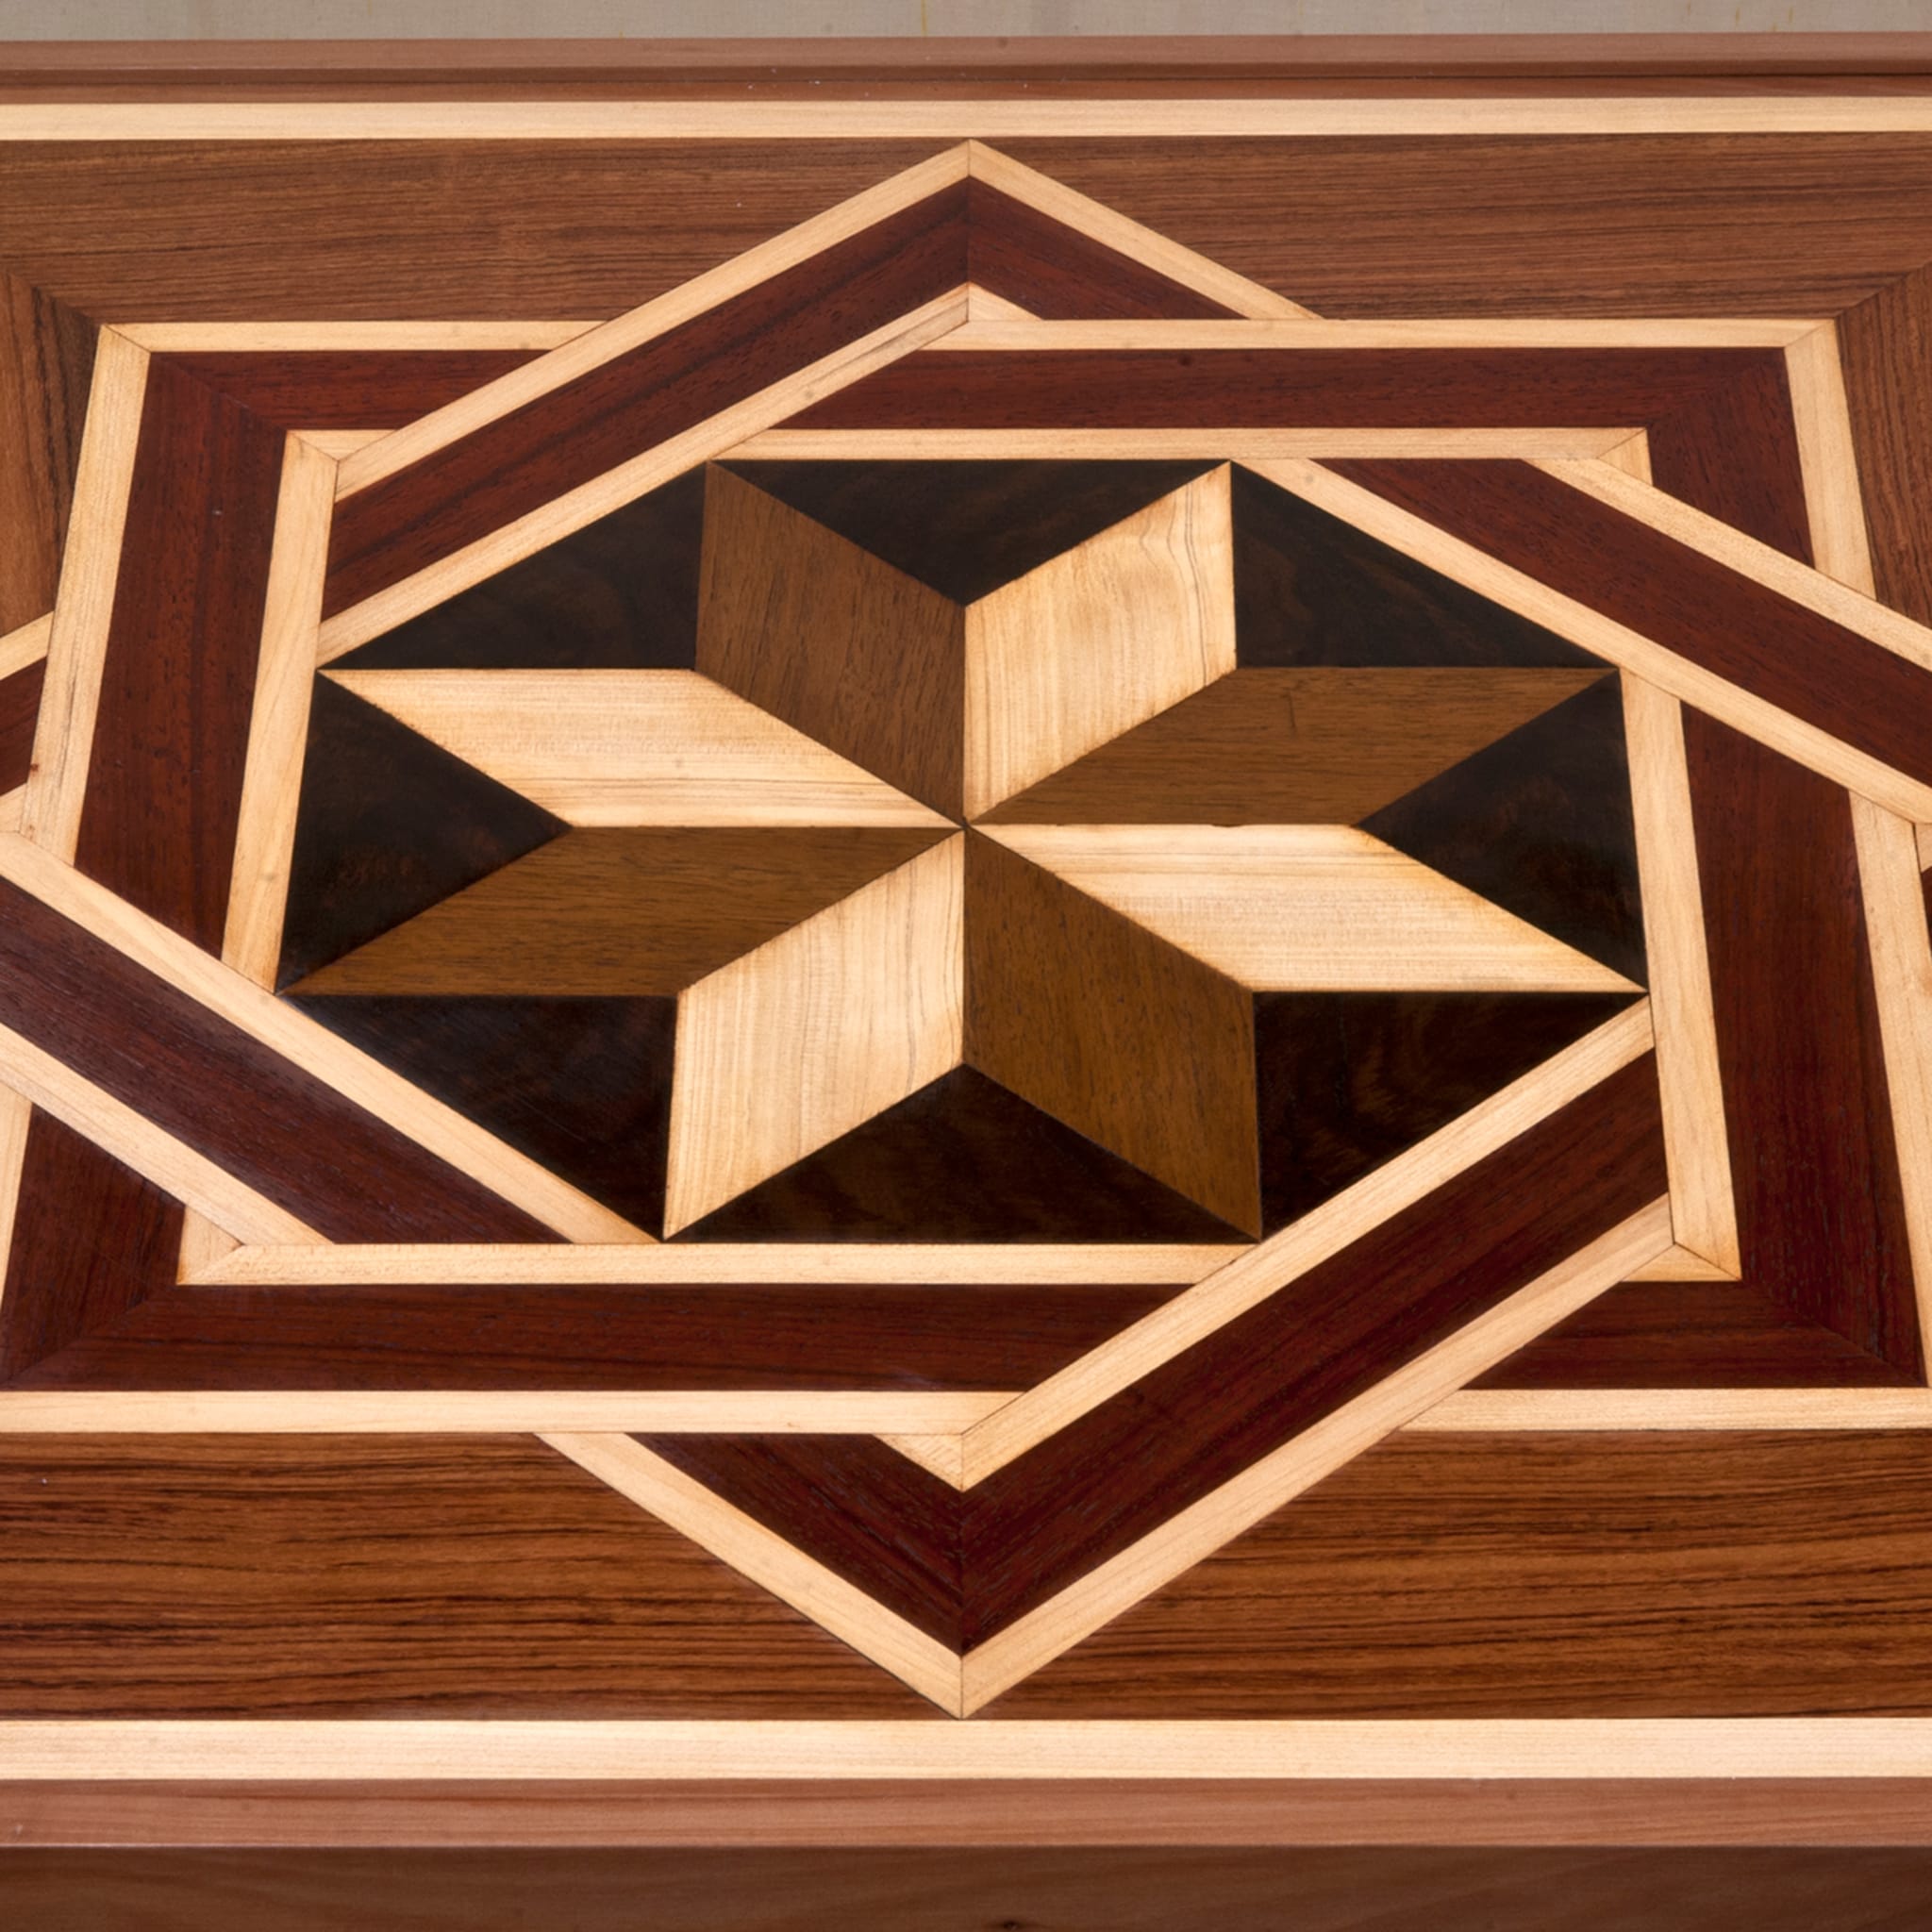 Renaissance-Style Marquetry Wheeled Coffee Table #2 - Alternative view 1